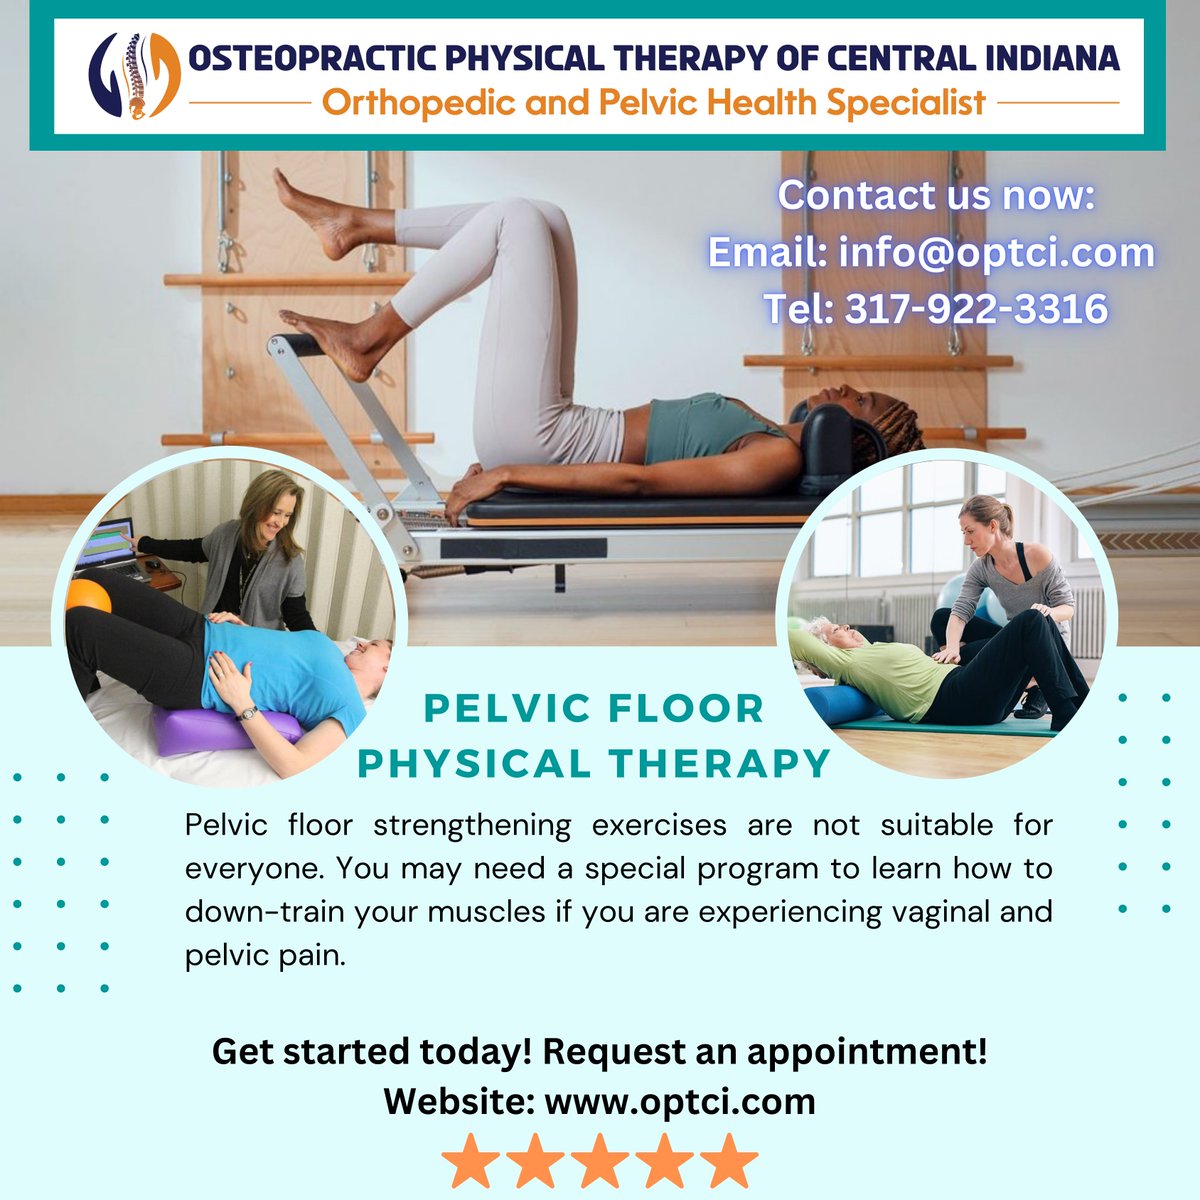 Pelvic Floor Physical Therapy

Pelvic floor therapy services and treatments
#PhysicalTherapy  #physicaltherapystudent #physicaltherapyassistant #physicaltherapyomaha #physicaltherapymonth #physicaltherapyworks #physicaltherapycalifornia #physicaltherapytime